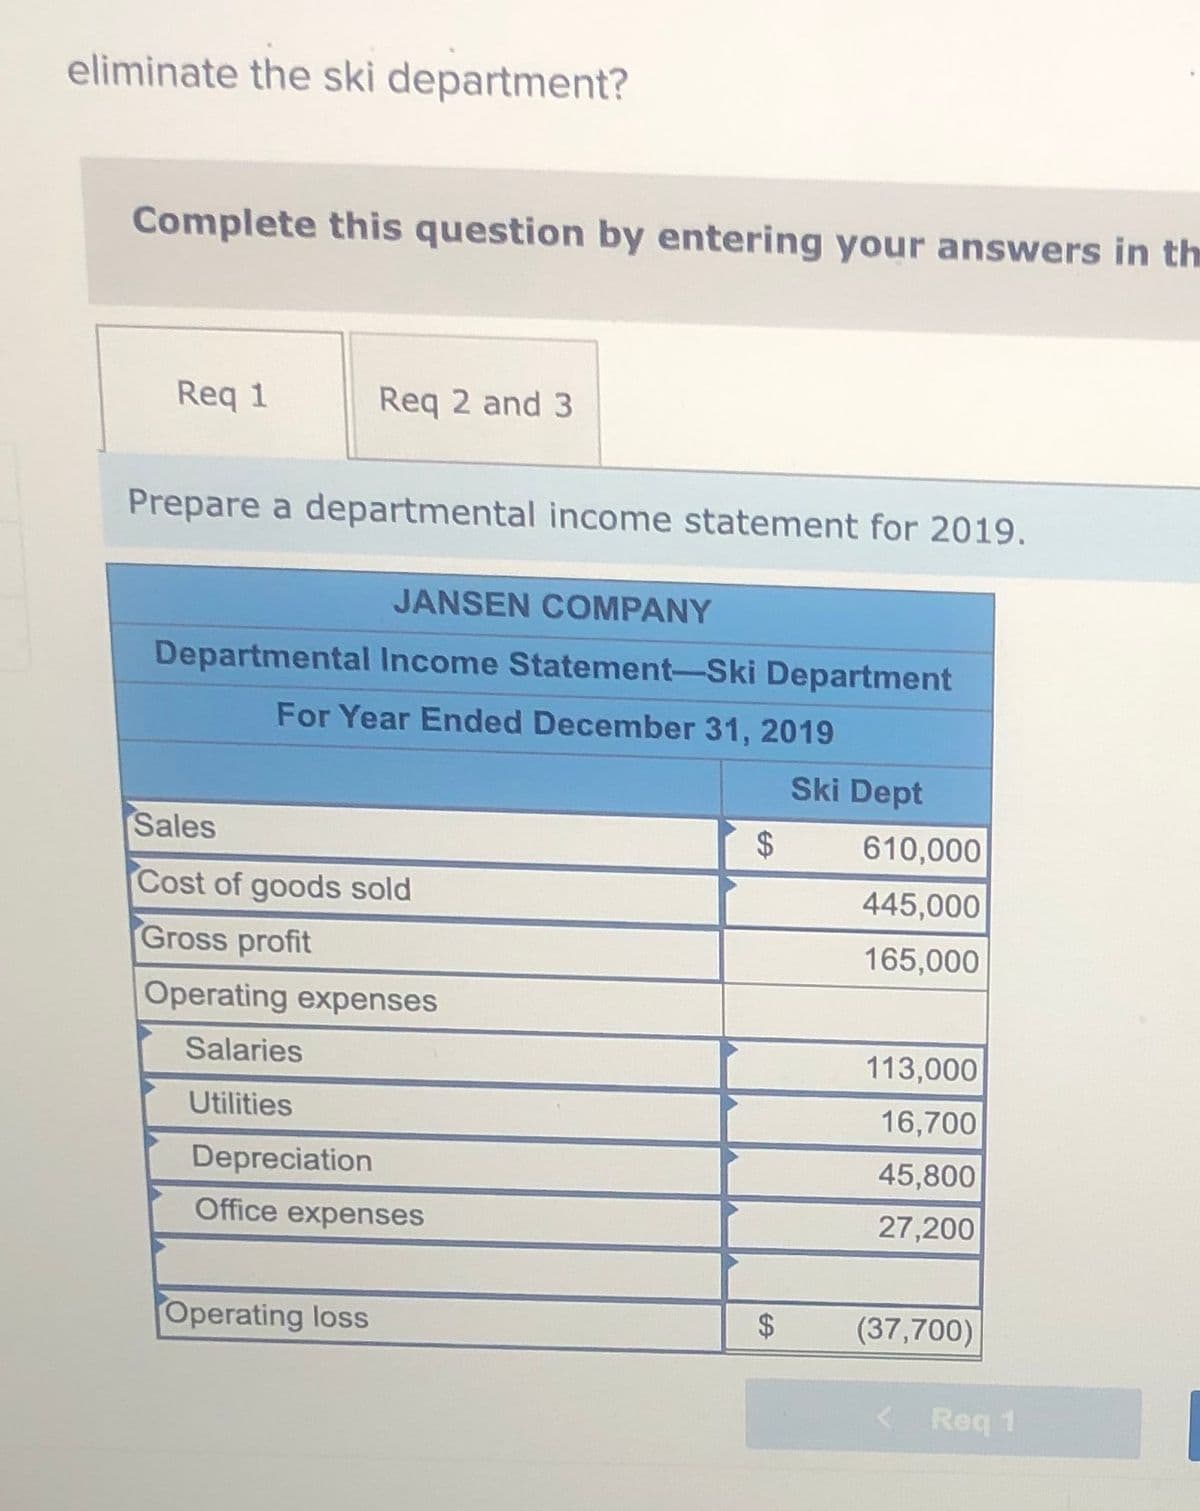 eliminate the ski department?
Complete this question by entering your answers in th
Req 1
Req 2 and 3
Prepare a departmental income statement for 2019.
JANSEN COMPANY
Departmental Income Statement-Ski Department
For Year Ended December 31, 2019
Ski Dept
Sales
610,000
Cost of goods sold
445,000
Gross profit
165,000
Operating expenses
Salaries
113,000
Utilities
16,700
Depreciation
45,800
Office expenses
27,200
Operating loss
(37,700)
< Req 1
%24
%24
